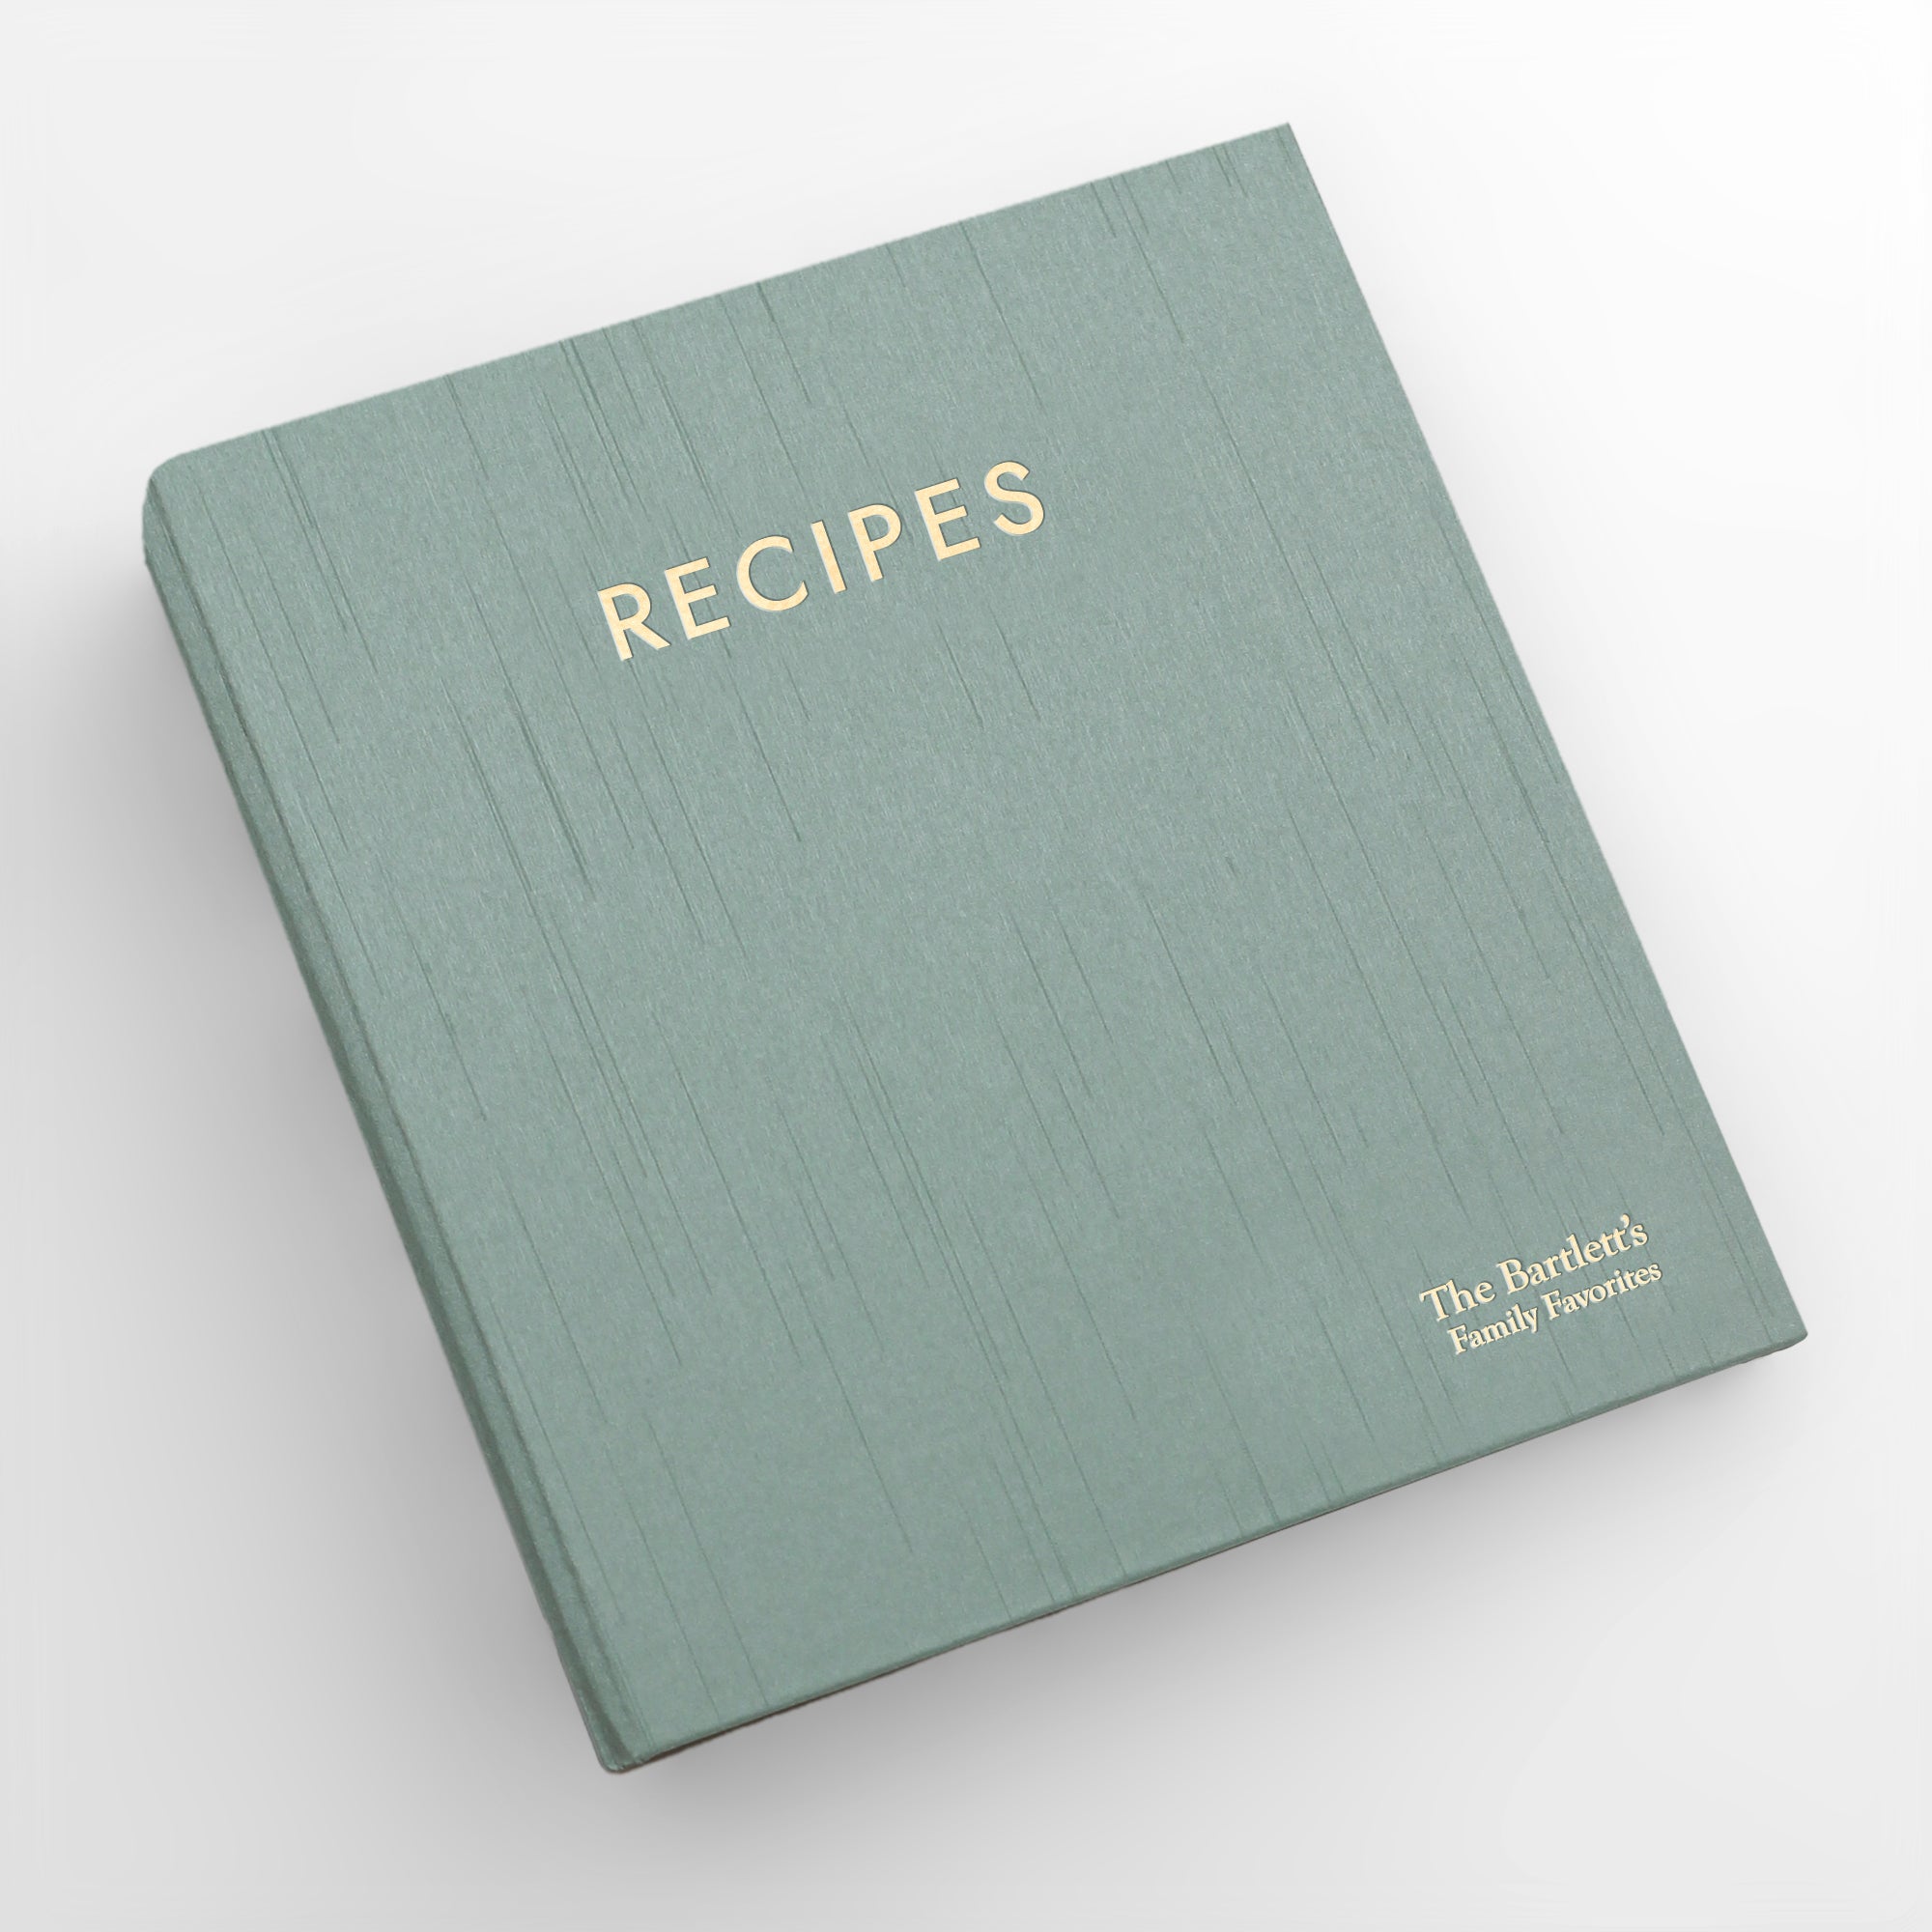 Recipe Journal Embossed with RECIPES covered with Misty Blue Silk